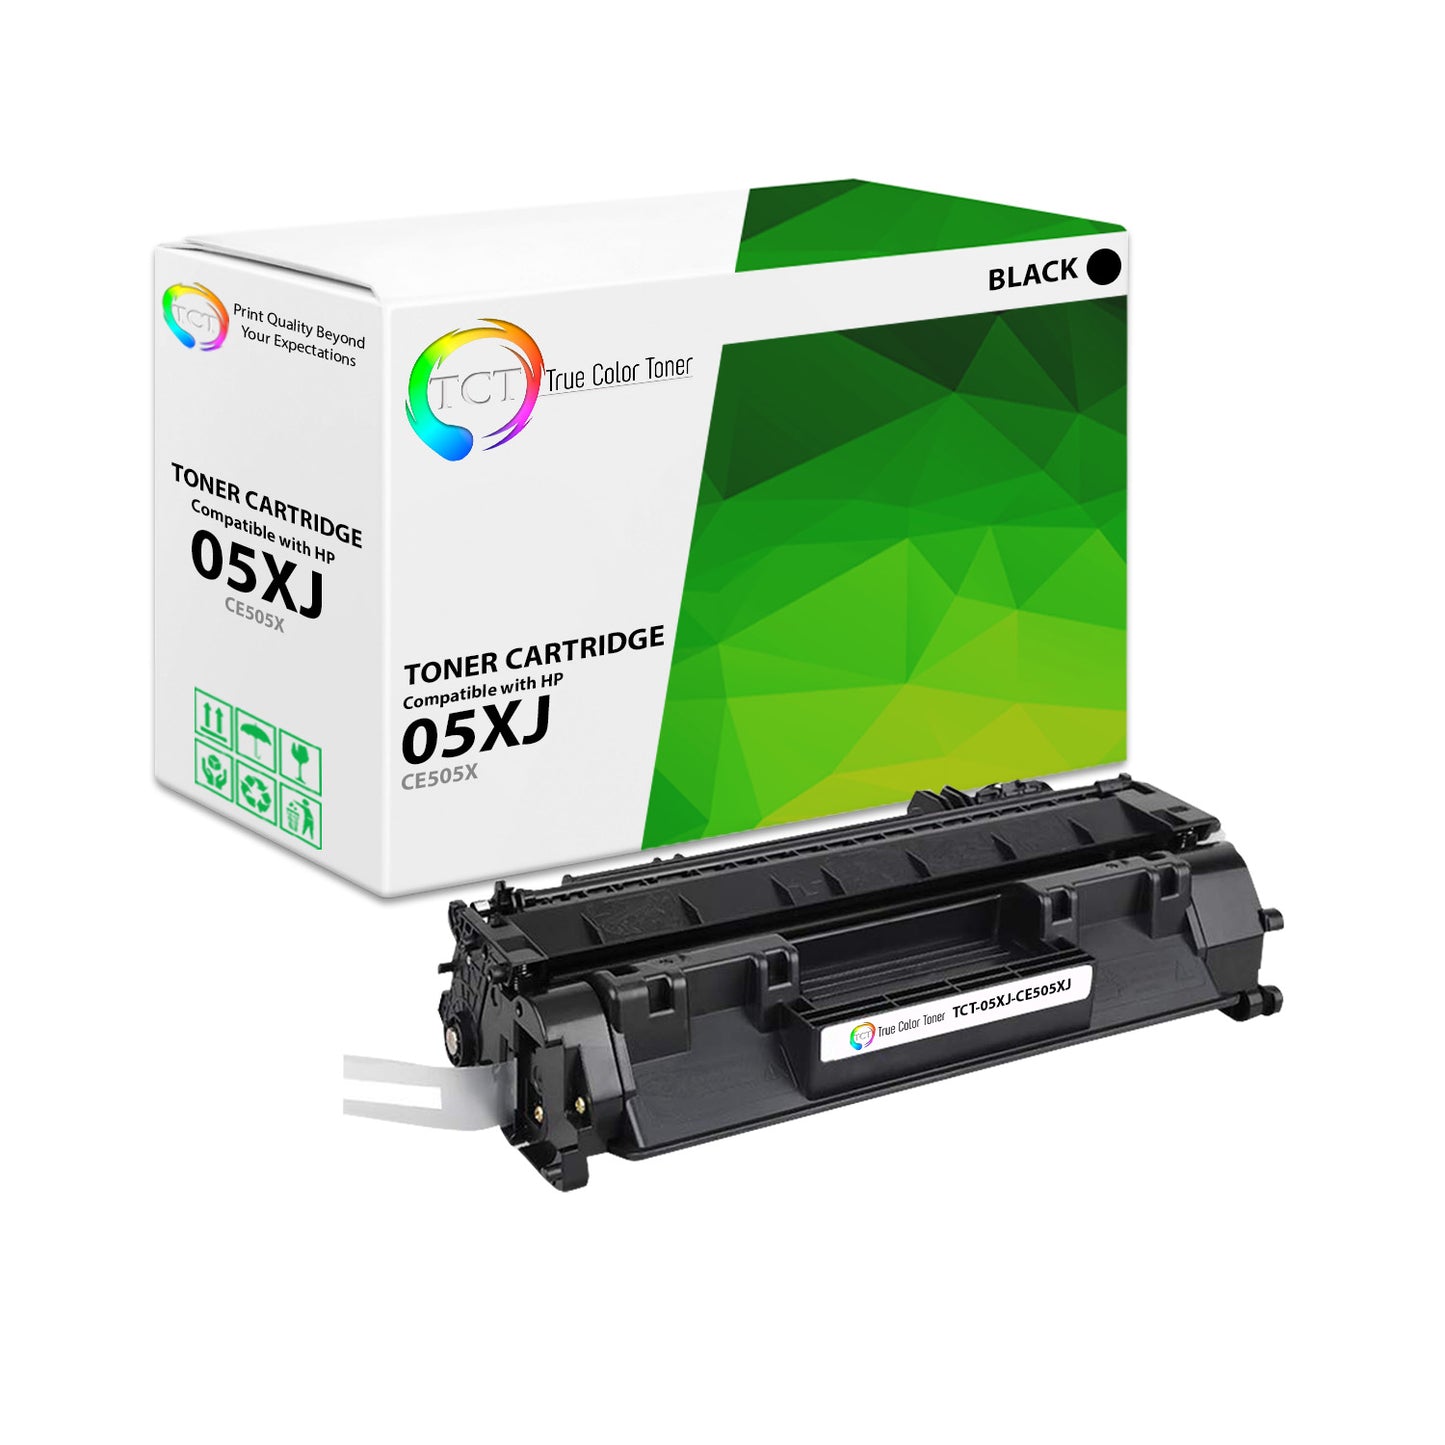 TCT Compatible High Yield Jumbo Toner Cartridge Replacement for the HP 05XJ Series - 1 Pack Black